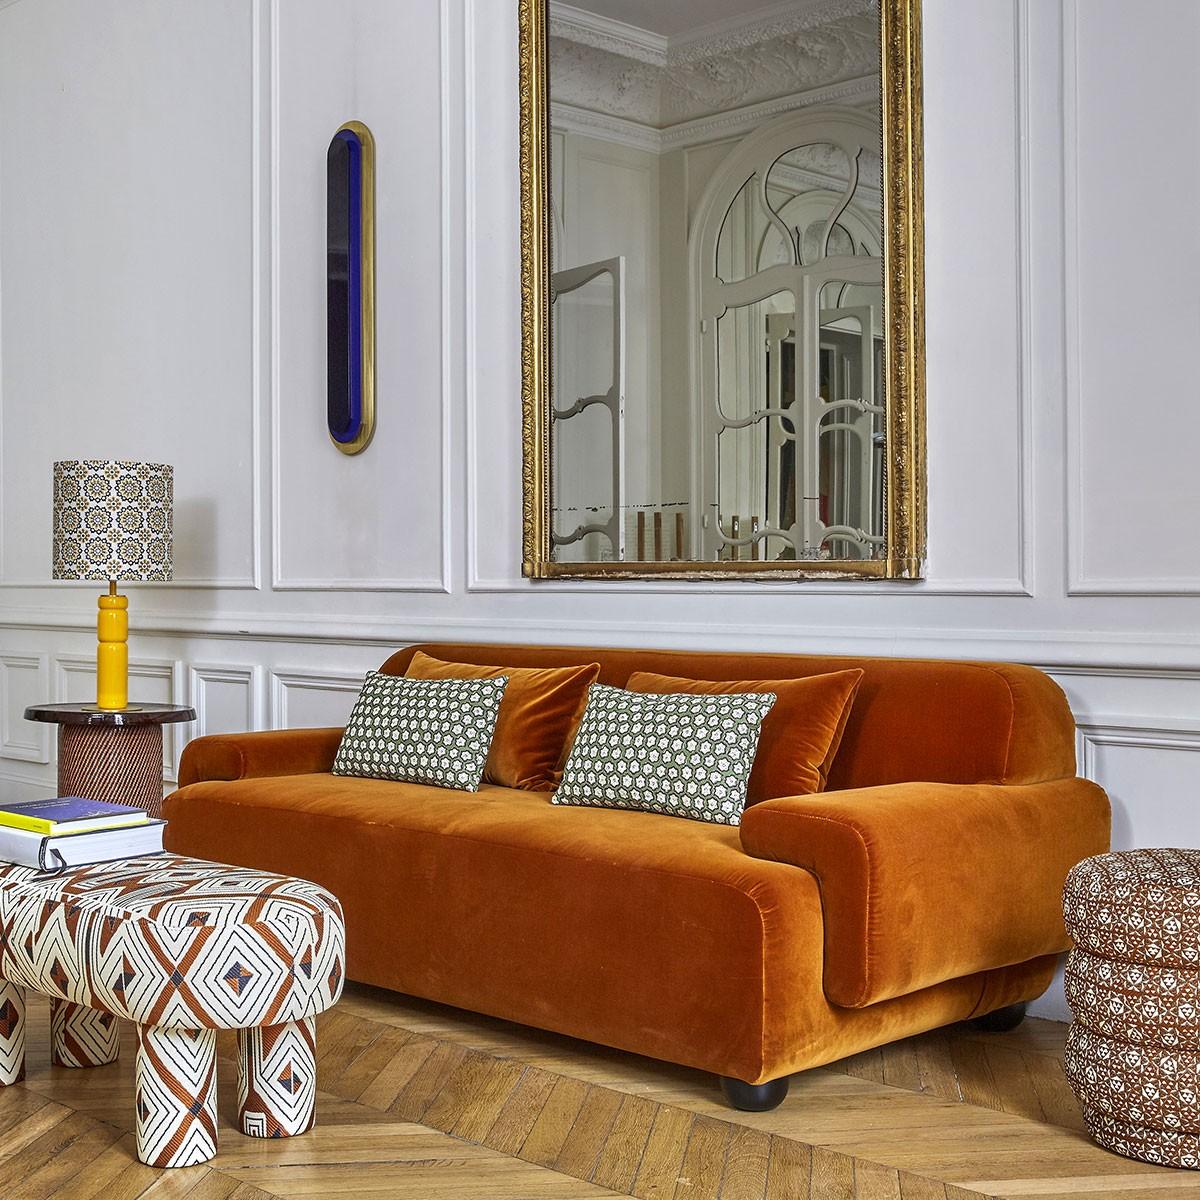 Popus Editions Lena 4 seater sofa in sangria London linen fabric

It looks like it's straight out of a movie, with its generous curves and wide armrests. It is a real invitation to spend long Sundays with the family, comfortably seated in front of